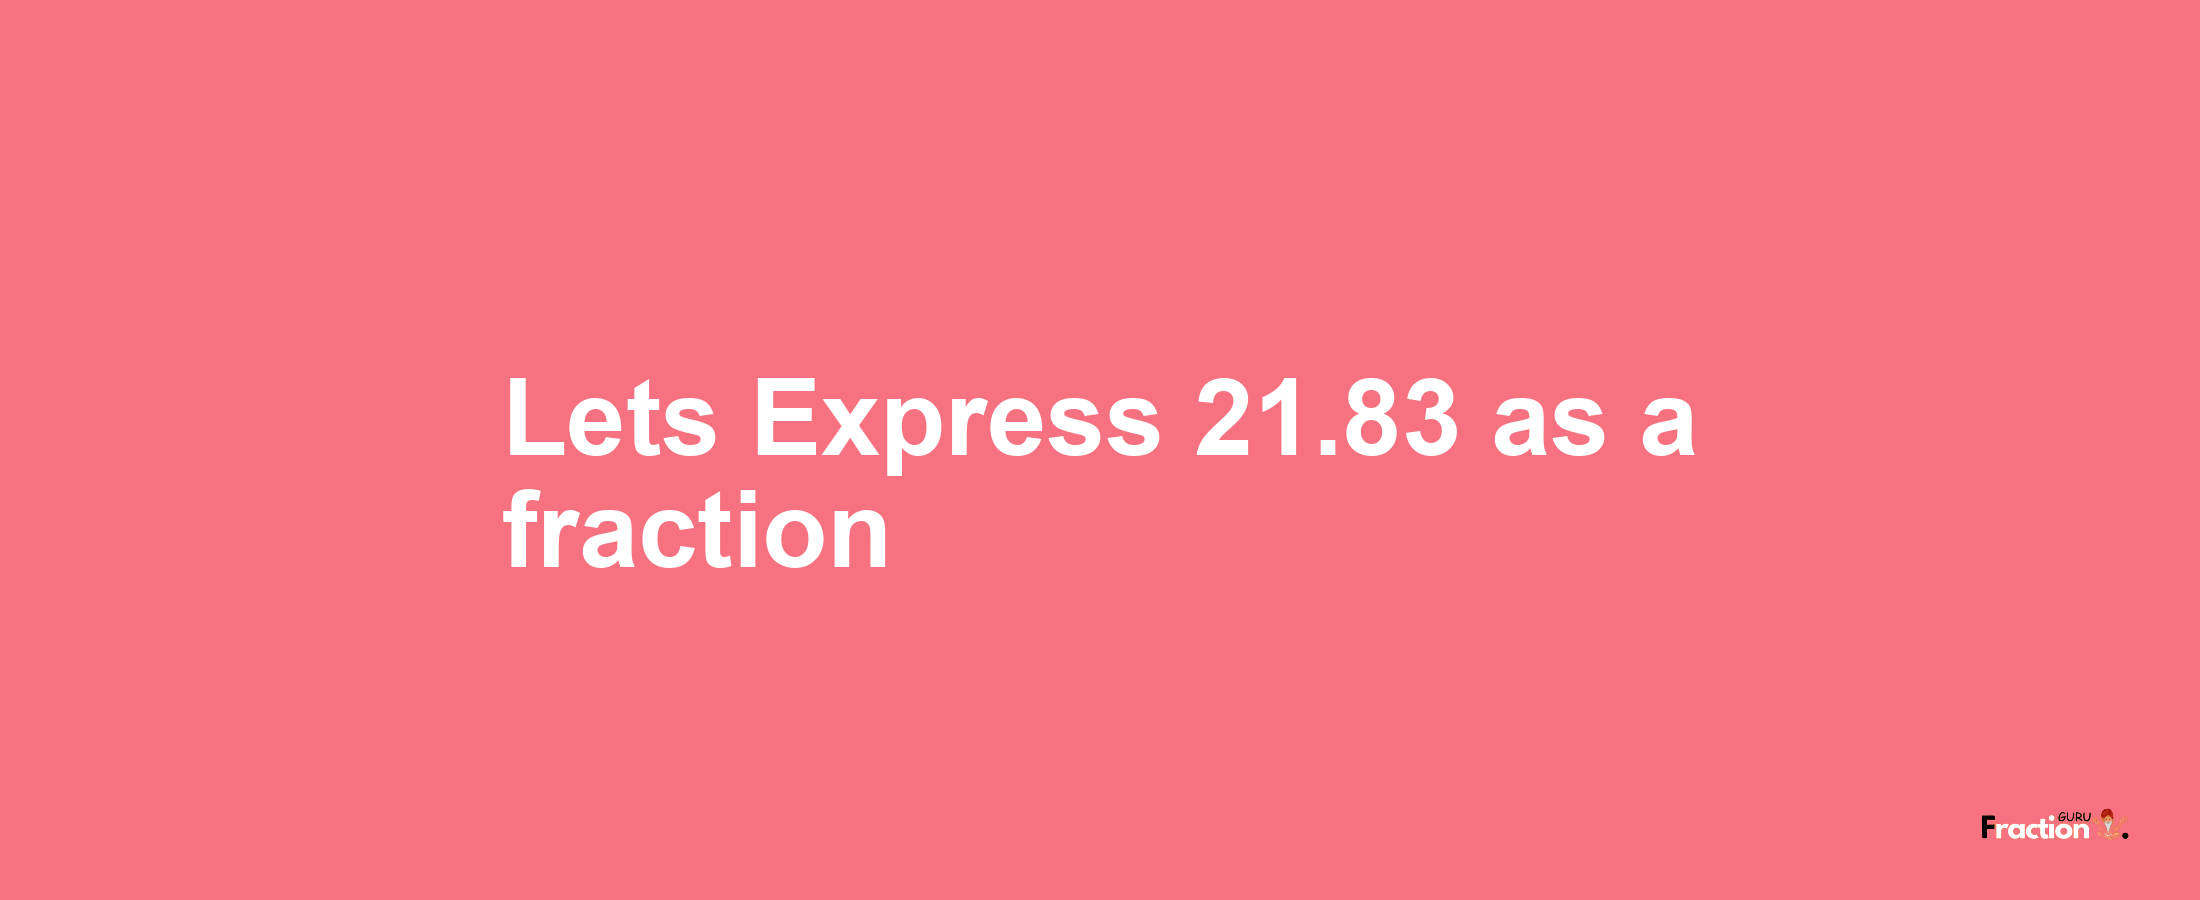 Lets Express 21.83 as afraction